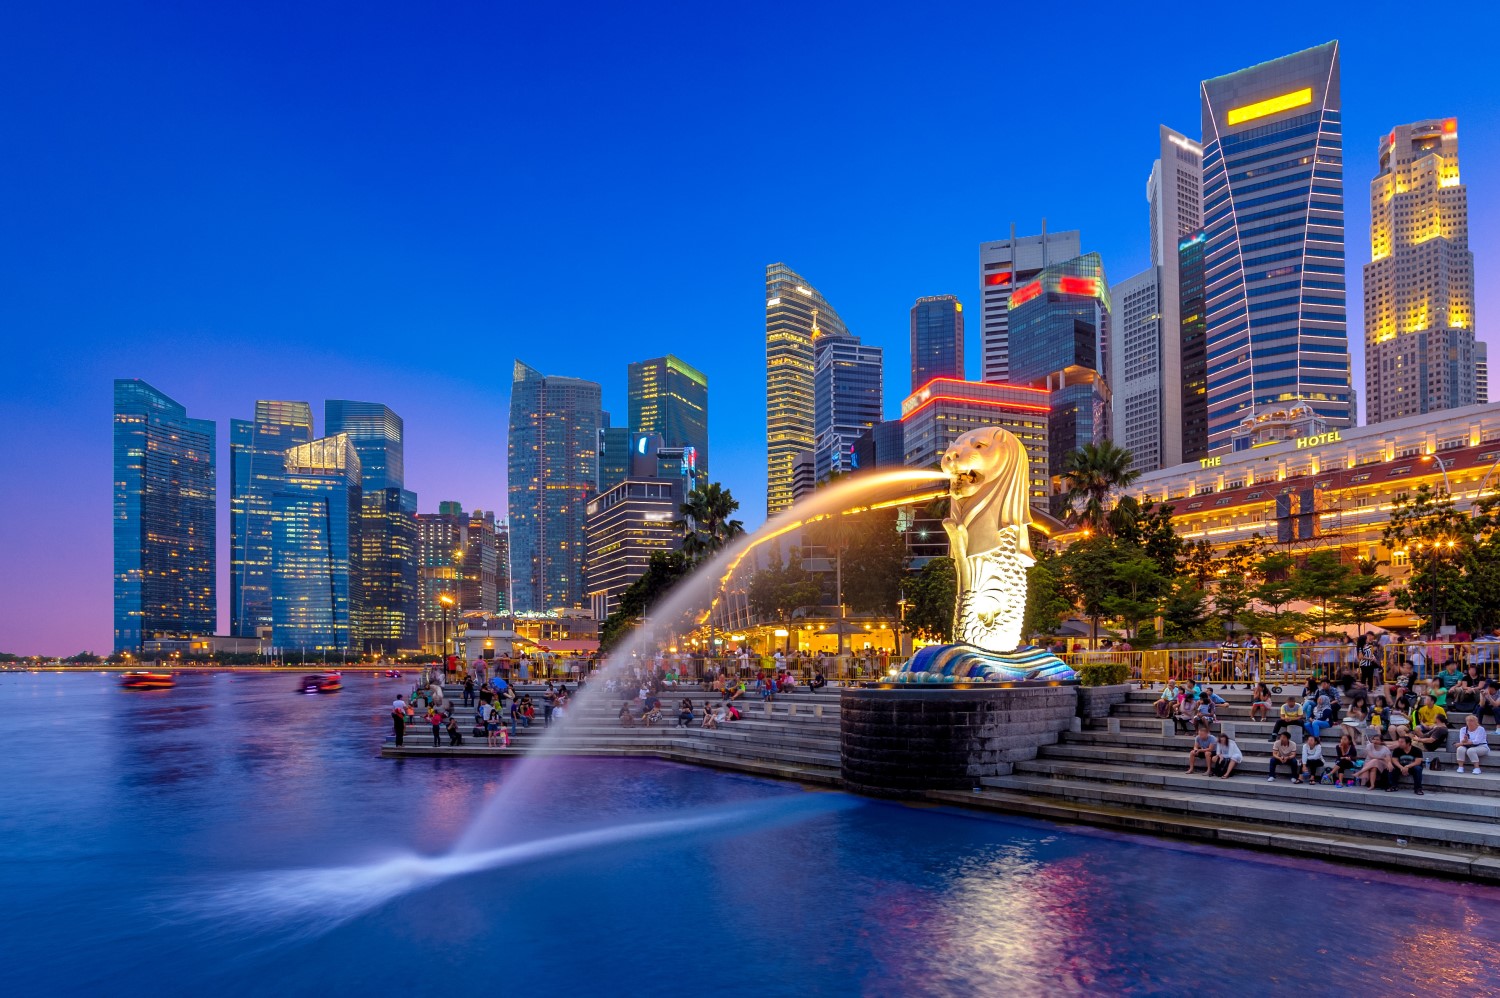 WATCH: Day 2 Of CoinDesk LIVE From Invest: Asia In Singapore